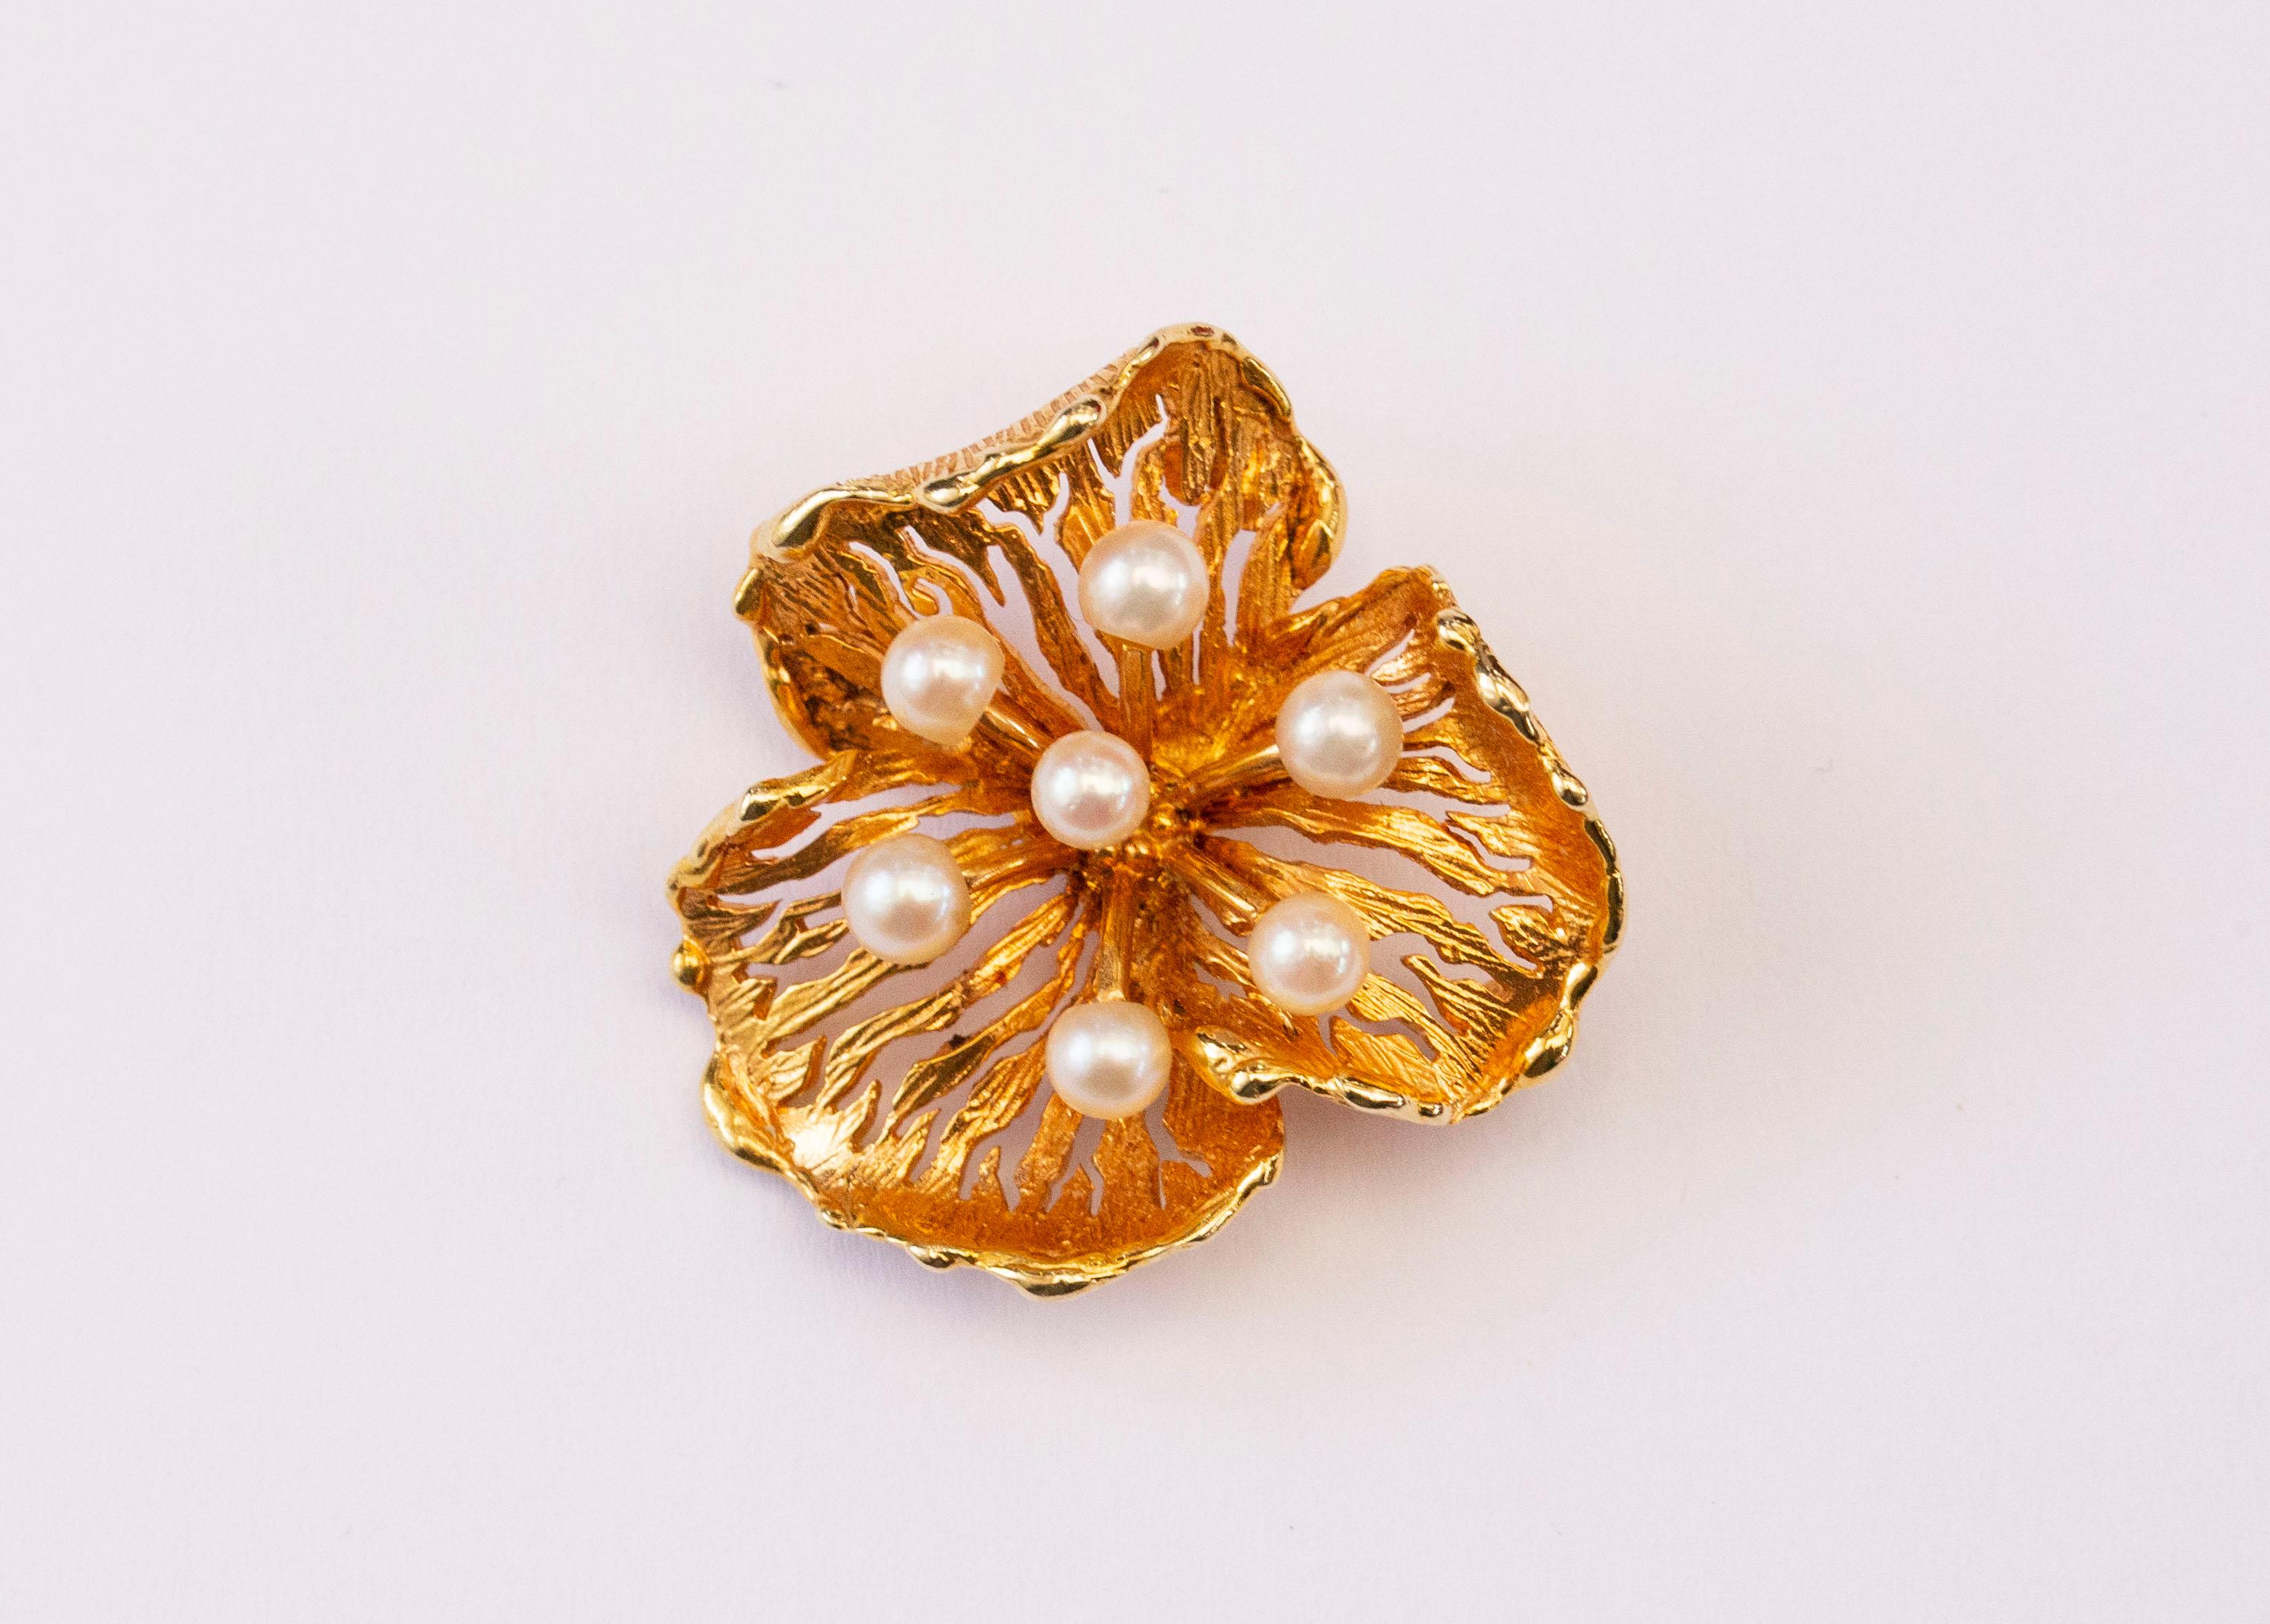 A vintage 14 karat yellow gold brooch in a form of an abstract  flower with seven cream-colored cultivated Akoya pearls in the middle. The brooch is of high quality and it features a precise and intricate finish. The brooch could be a great asset